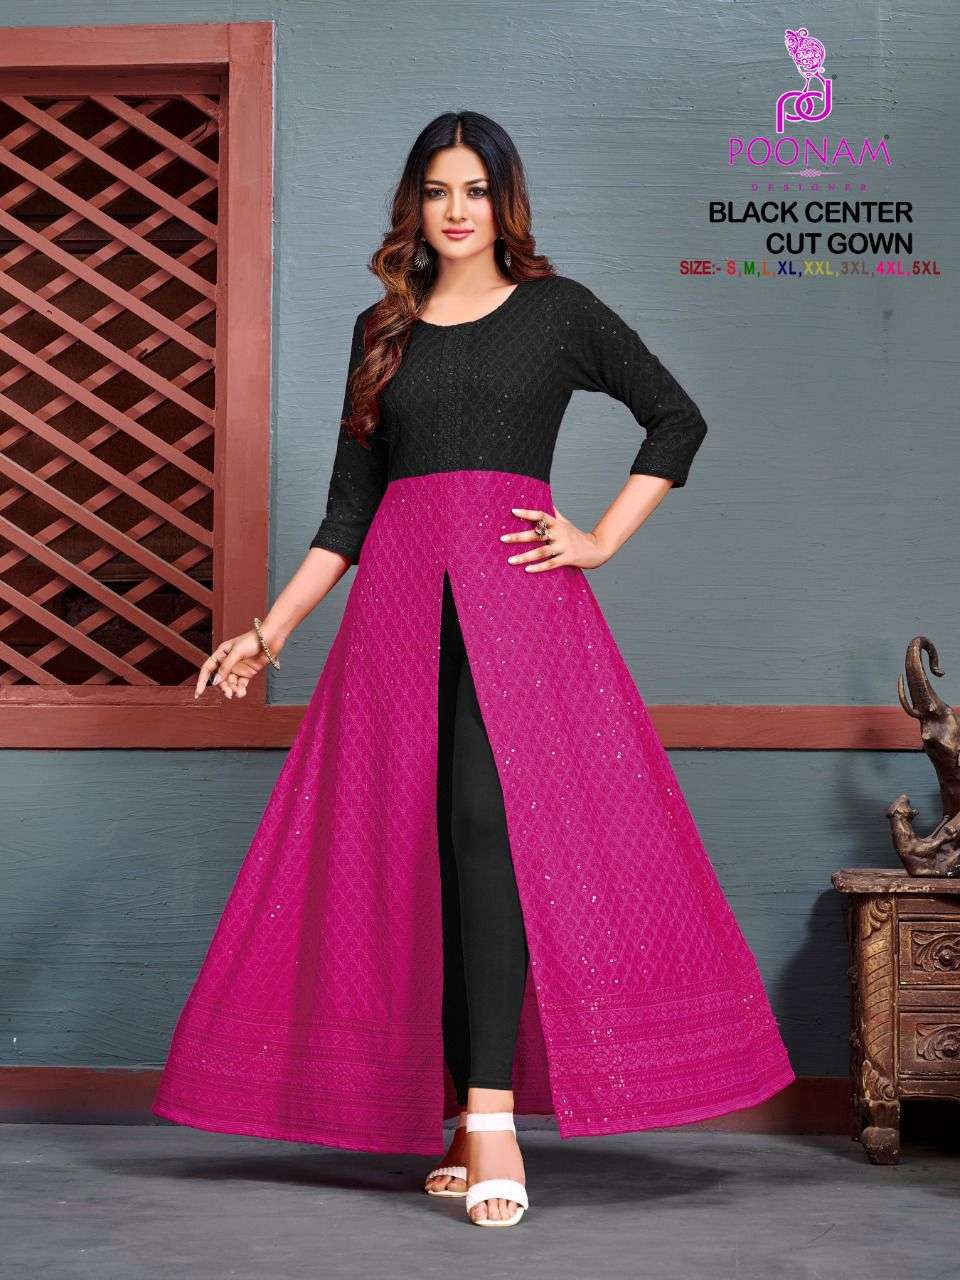 POONAM DESIGNER PRESENTS BLACK CENTER 1001-1008 SERIES PURE CHIKAN WORK CUT GOWN COLLECTION AT WHOLESALE RATES N520